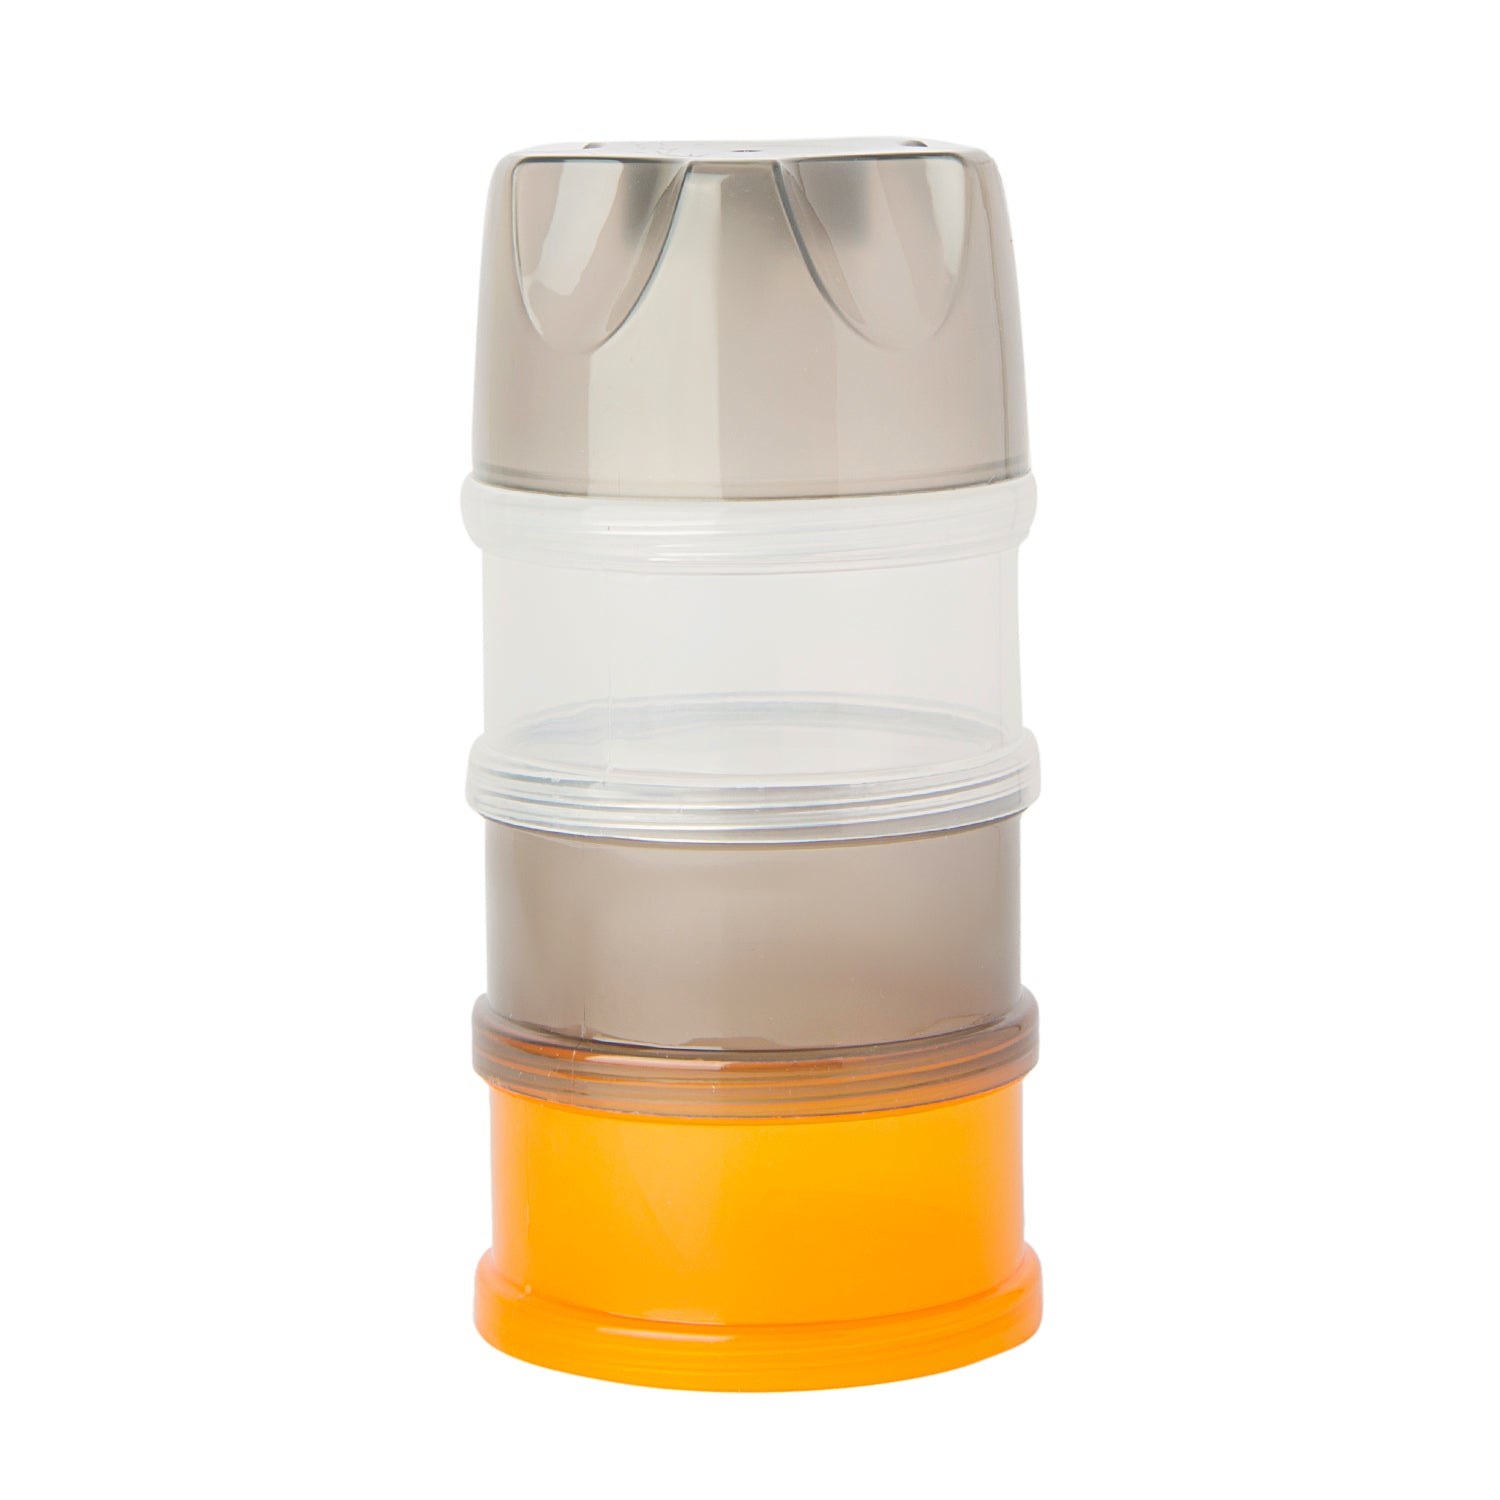 Translucent Multicolour 3 Tier Container - Baby Moo